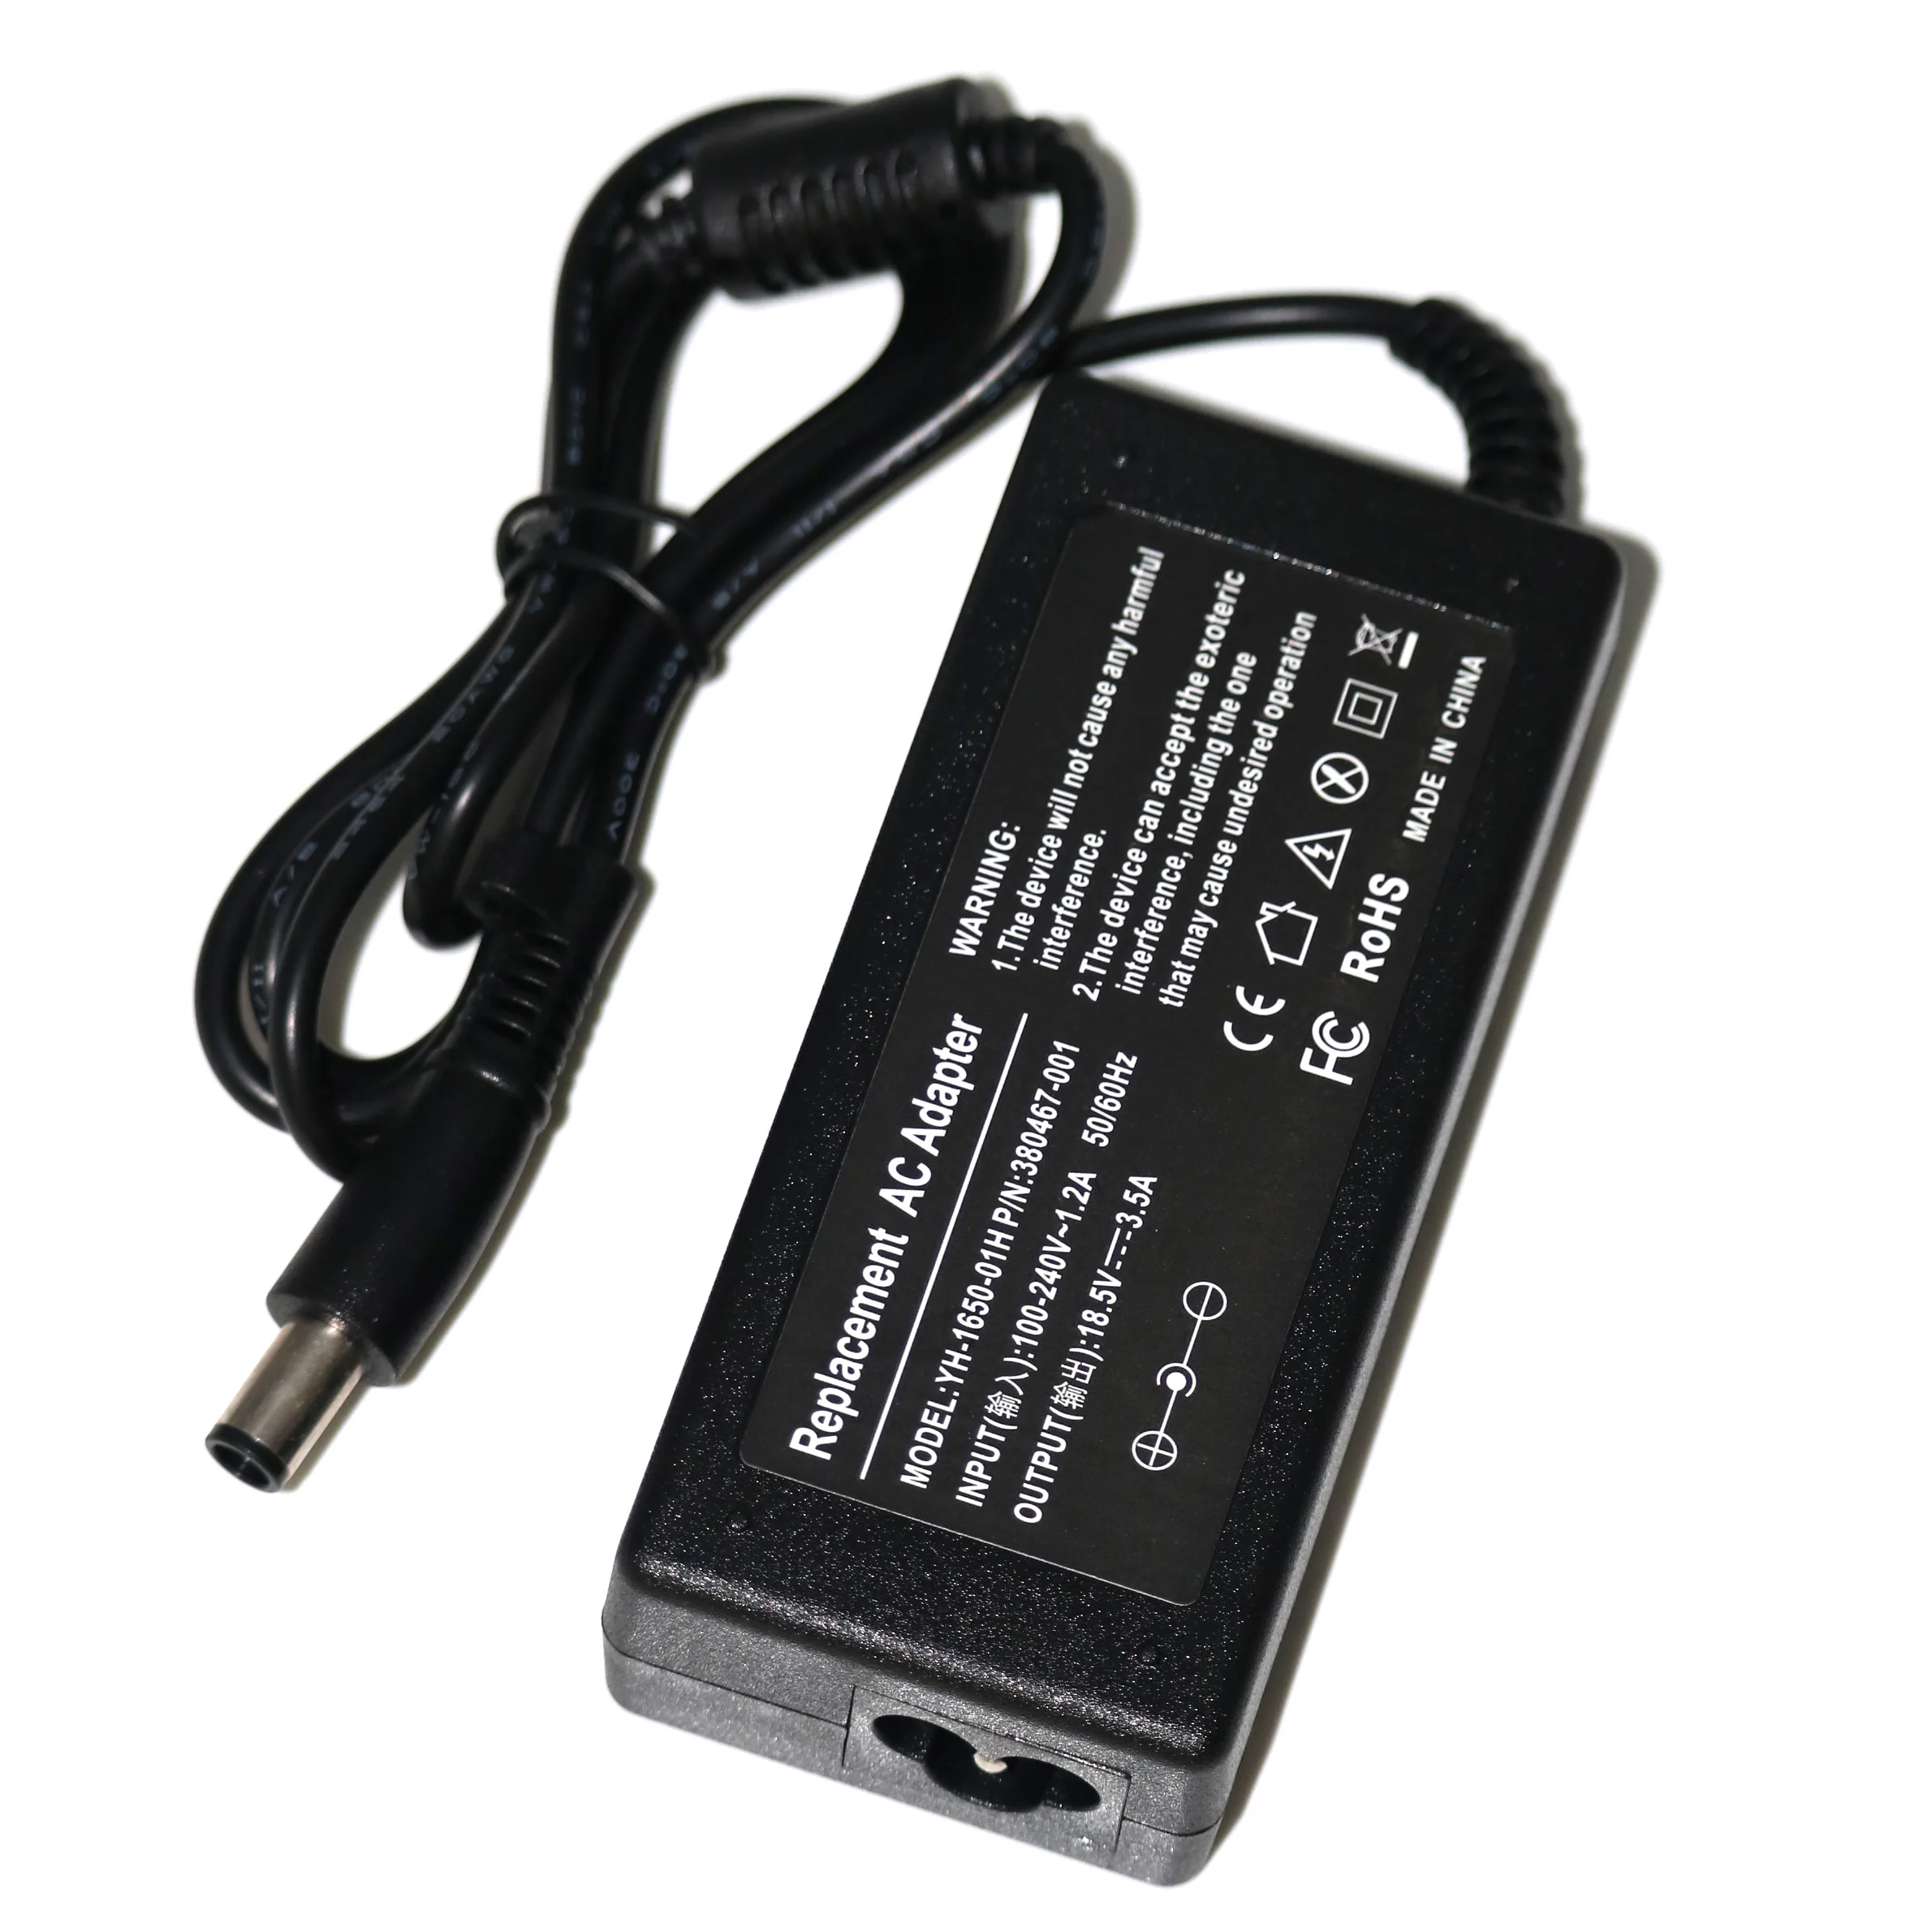 

18.5V 3.5A 65W AC Adapter For hp Laptop Charger For HP Compaq 6910P 2230s DV5 DV6 DV7 DV4 G50 G60 N193 CQ43 CQ32 CQ60 CQ61 CQ62